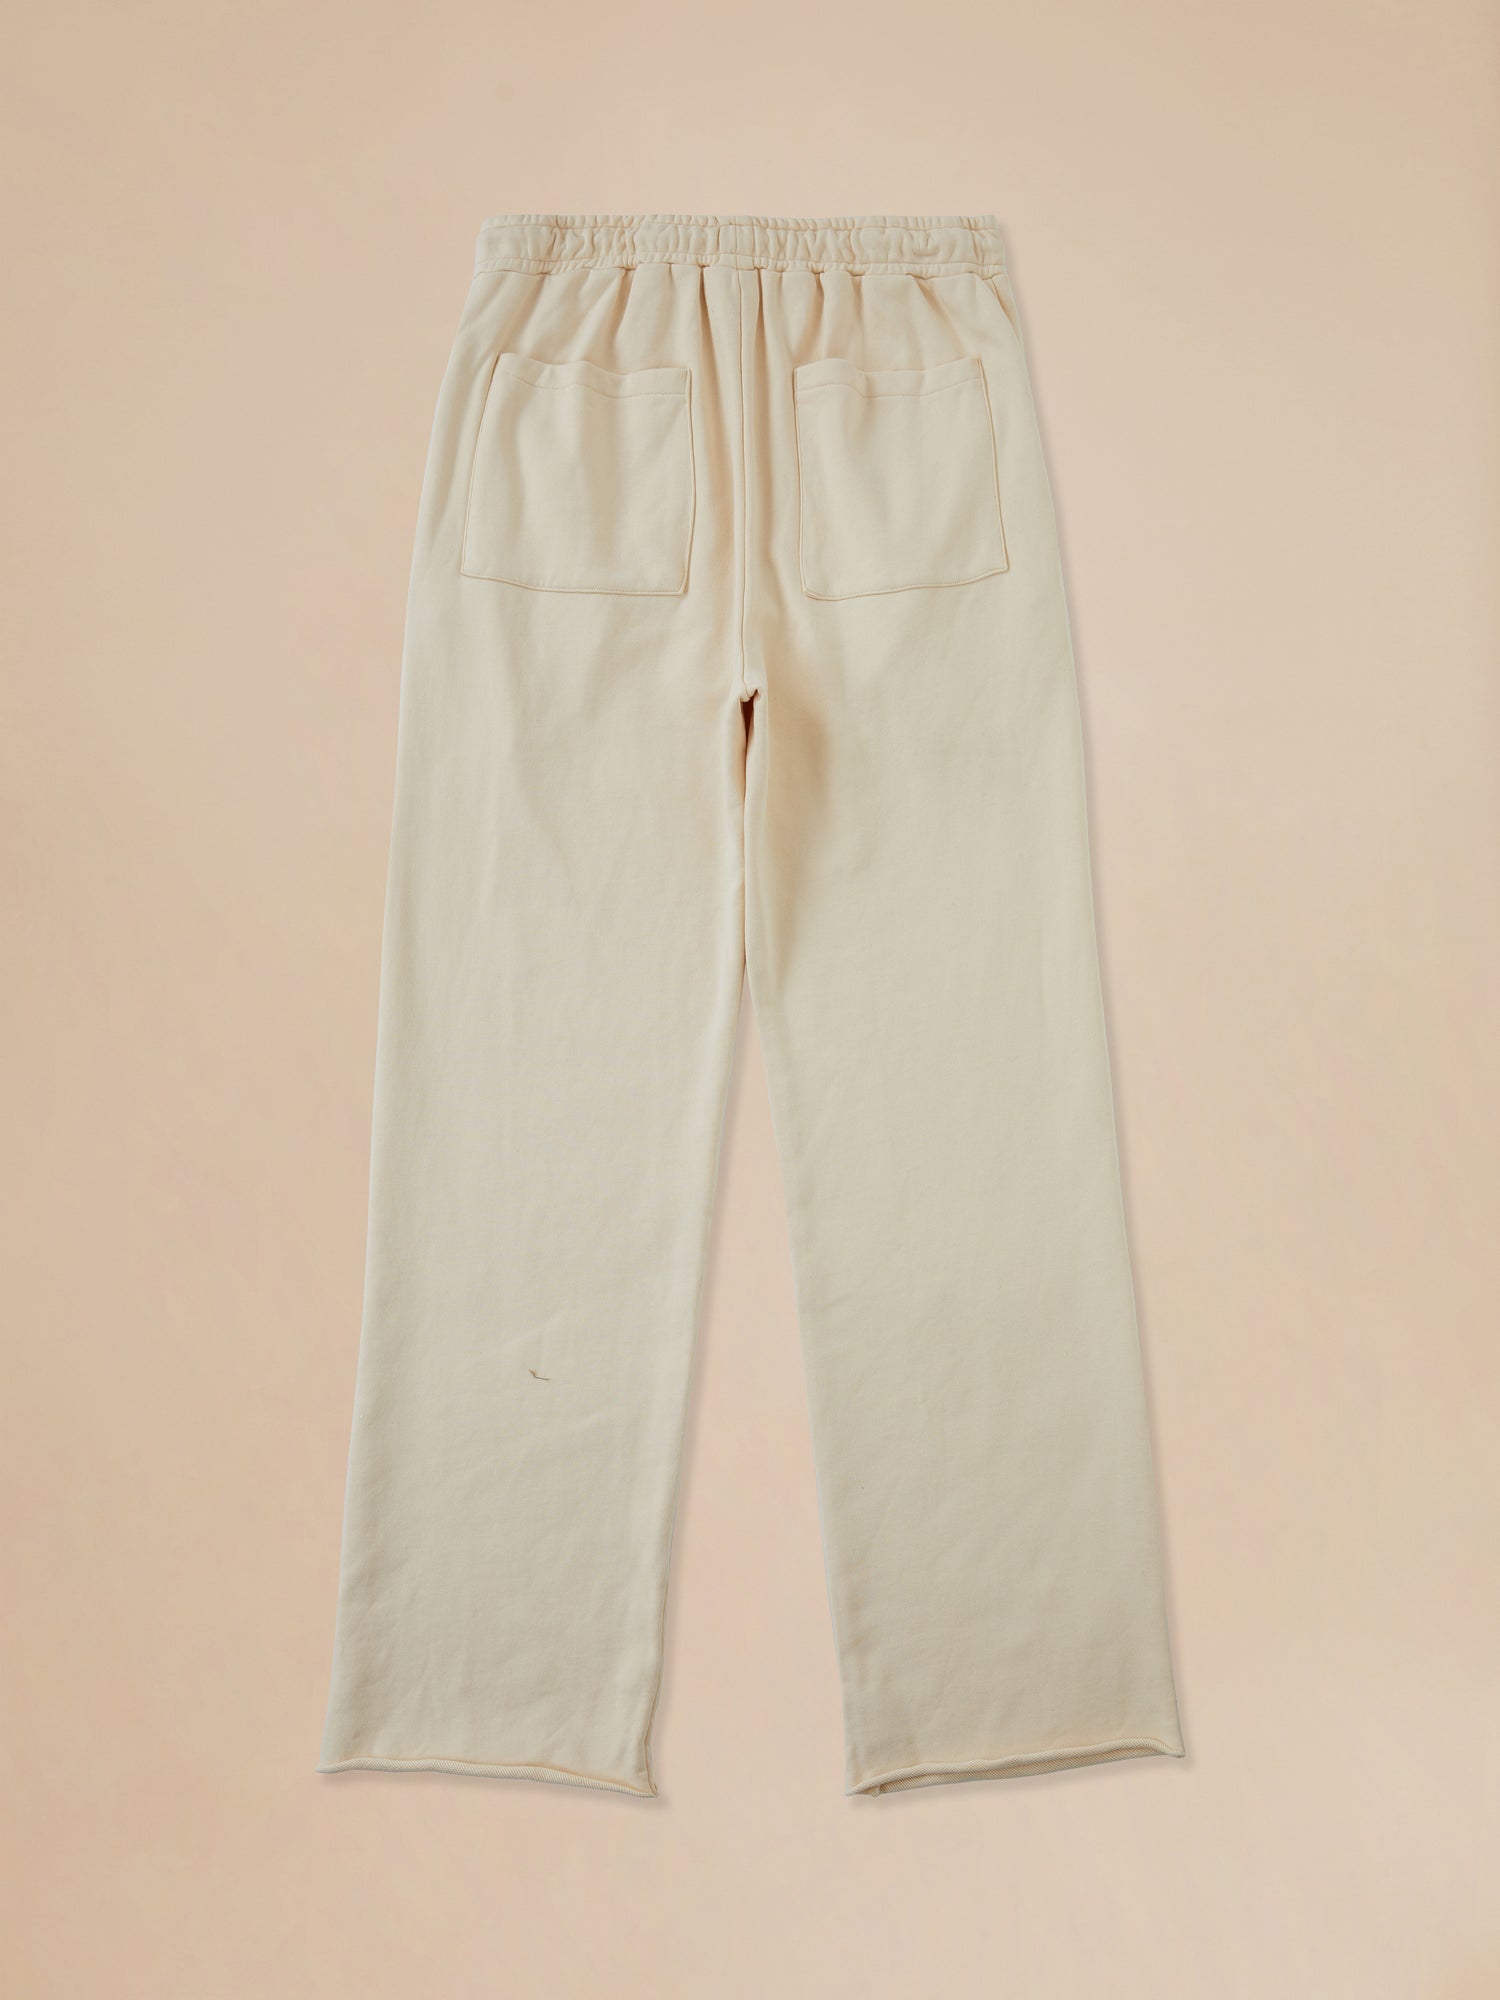 A pair of Found Sandshell Lounge Pants with a worn-in look.